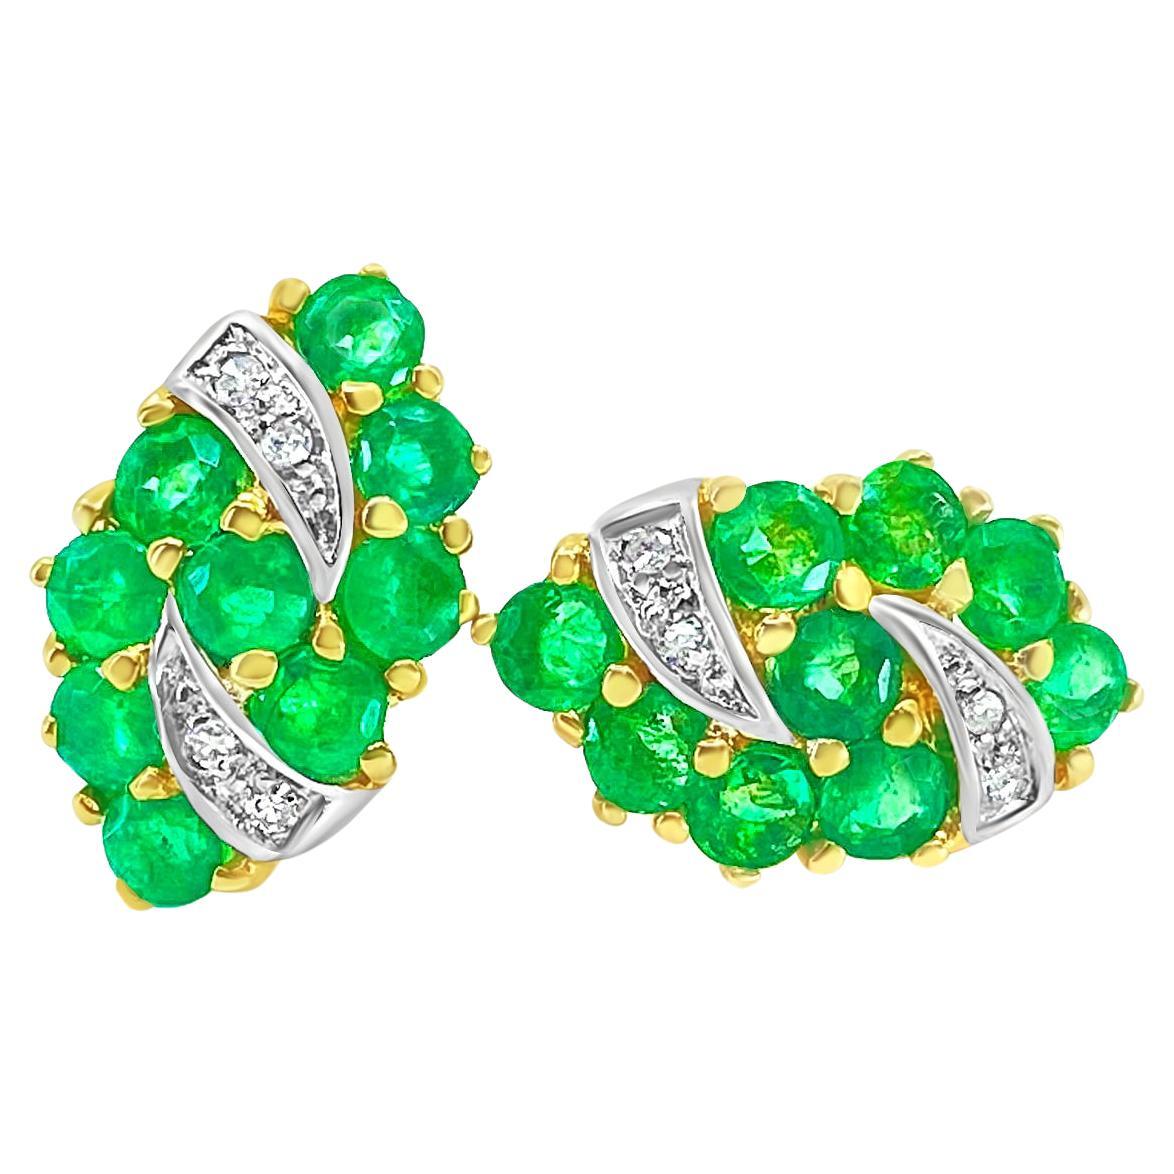 Vintage Natural Emerald & Diamond Earrings for Her 